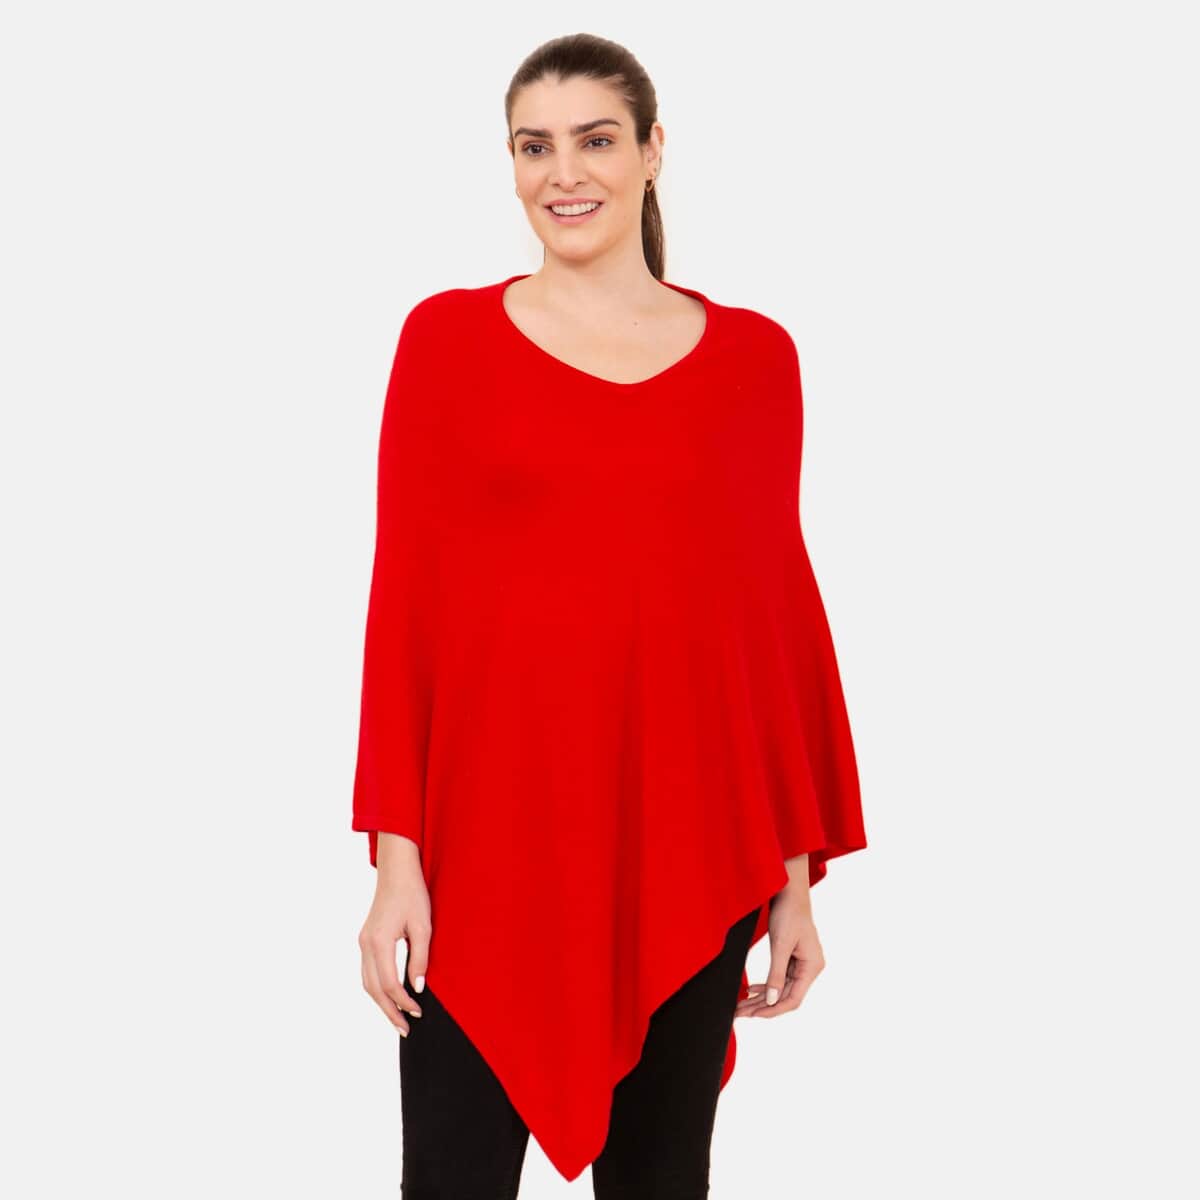 100% Cashmere Wool Designer LA MAREY Red Poncho - One Size Fits Most image number 3